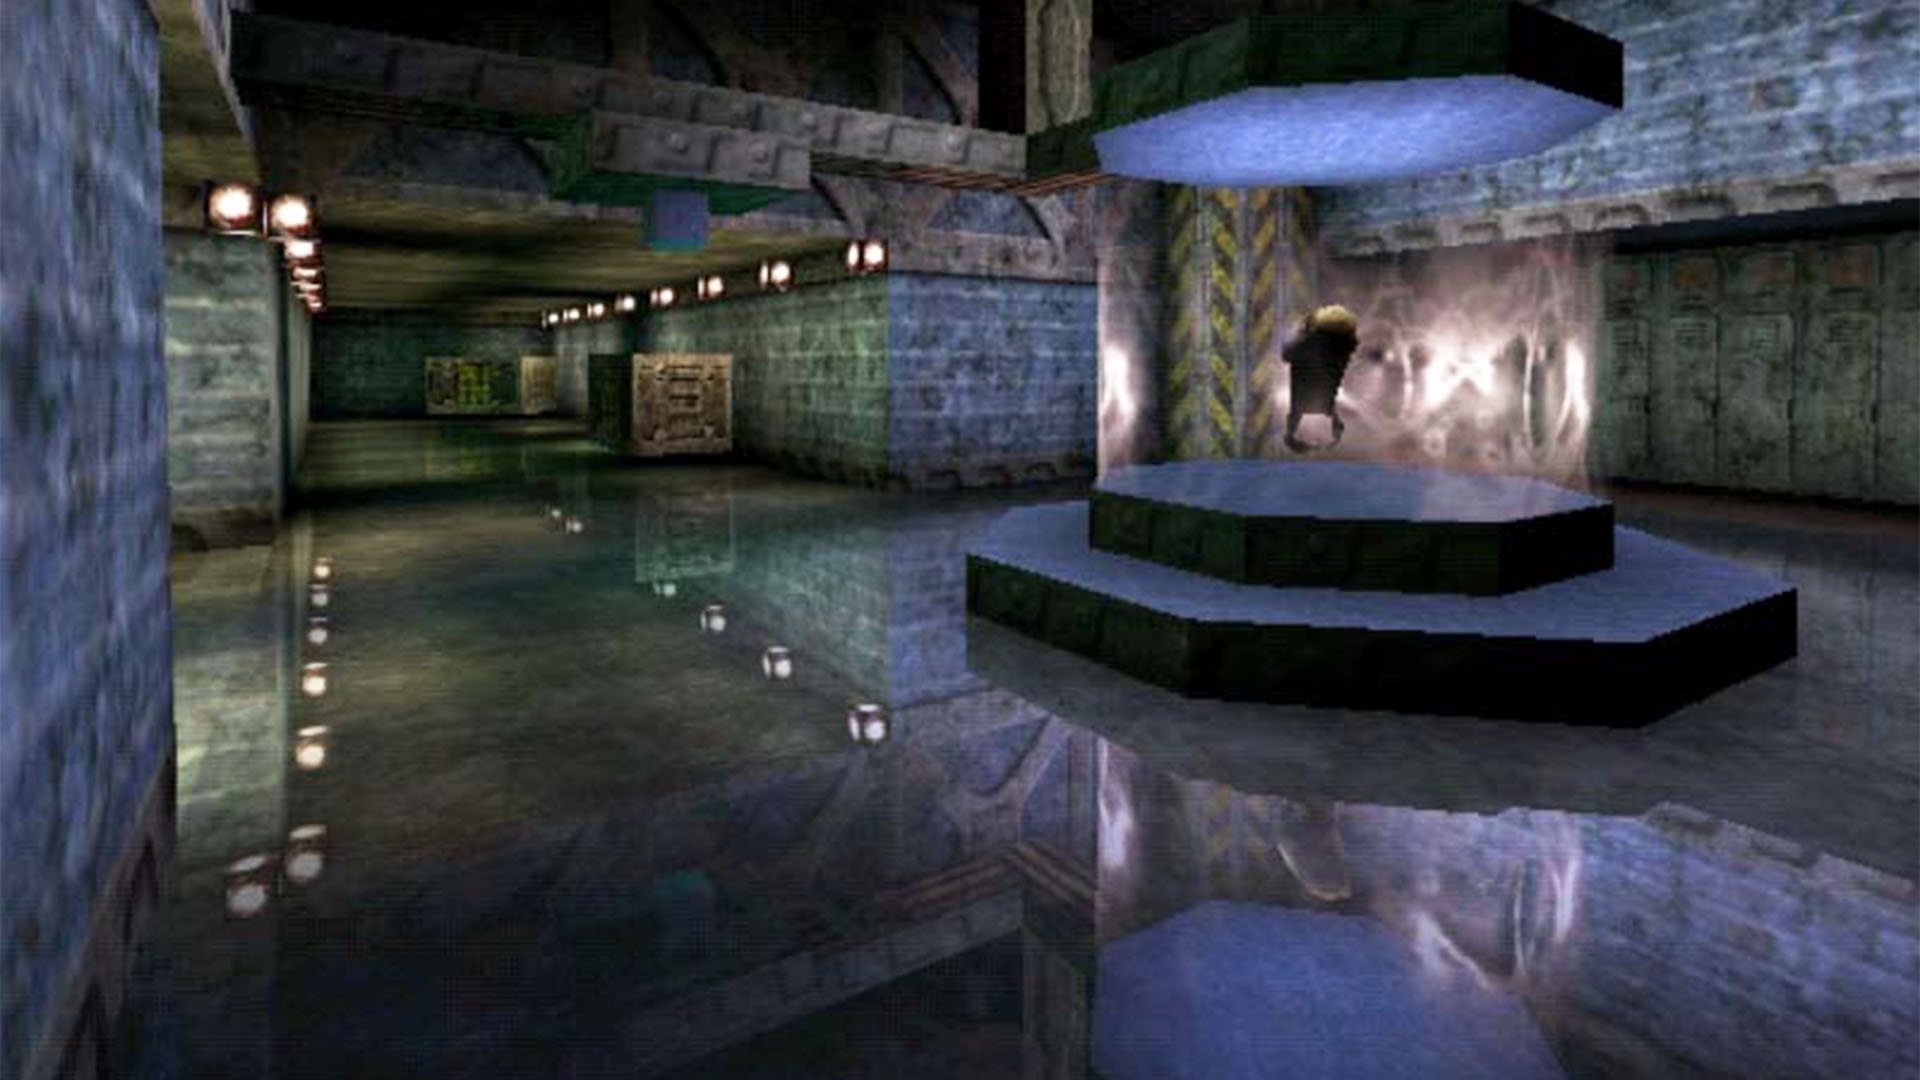 3dfx Voodoo graphics: Unreal GLide screenshot showing reflective surfaces